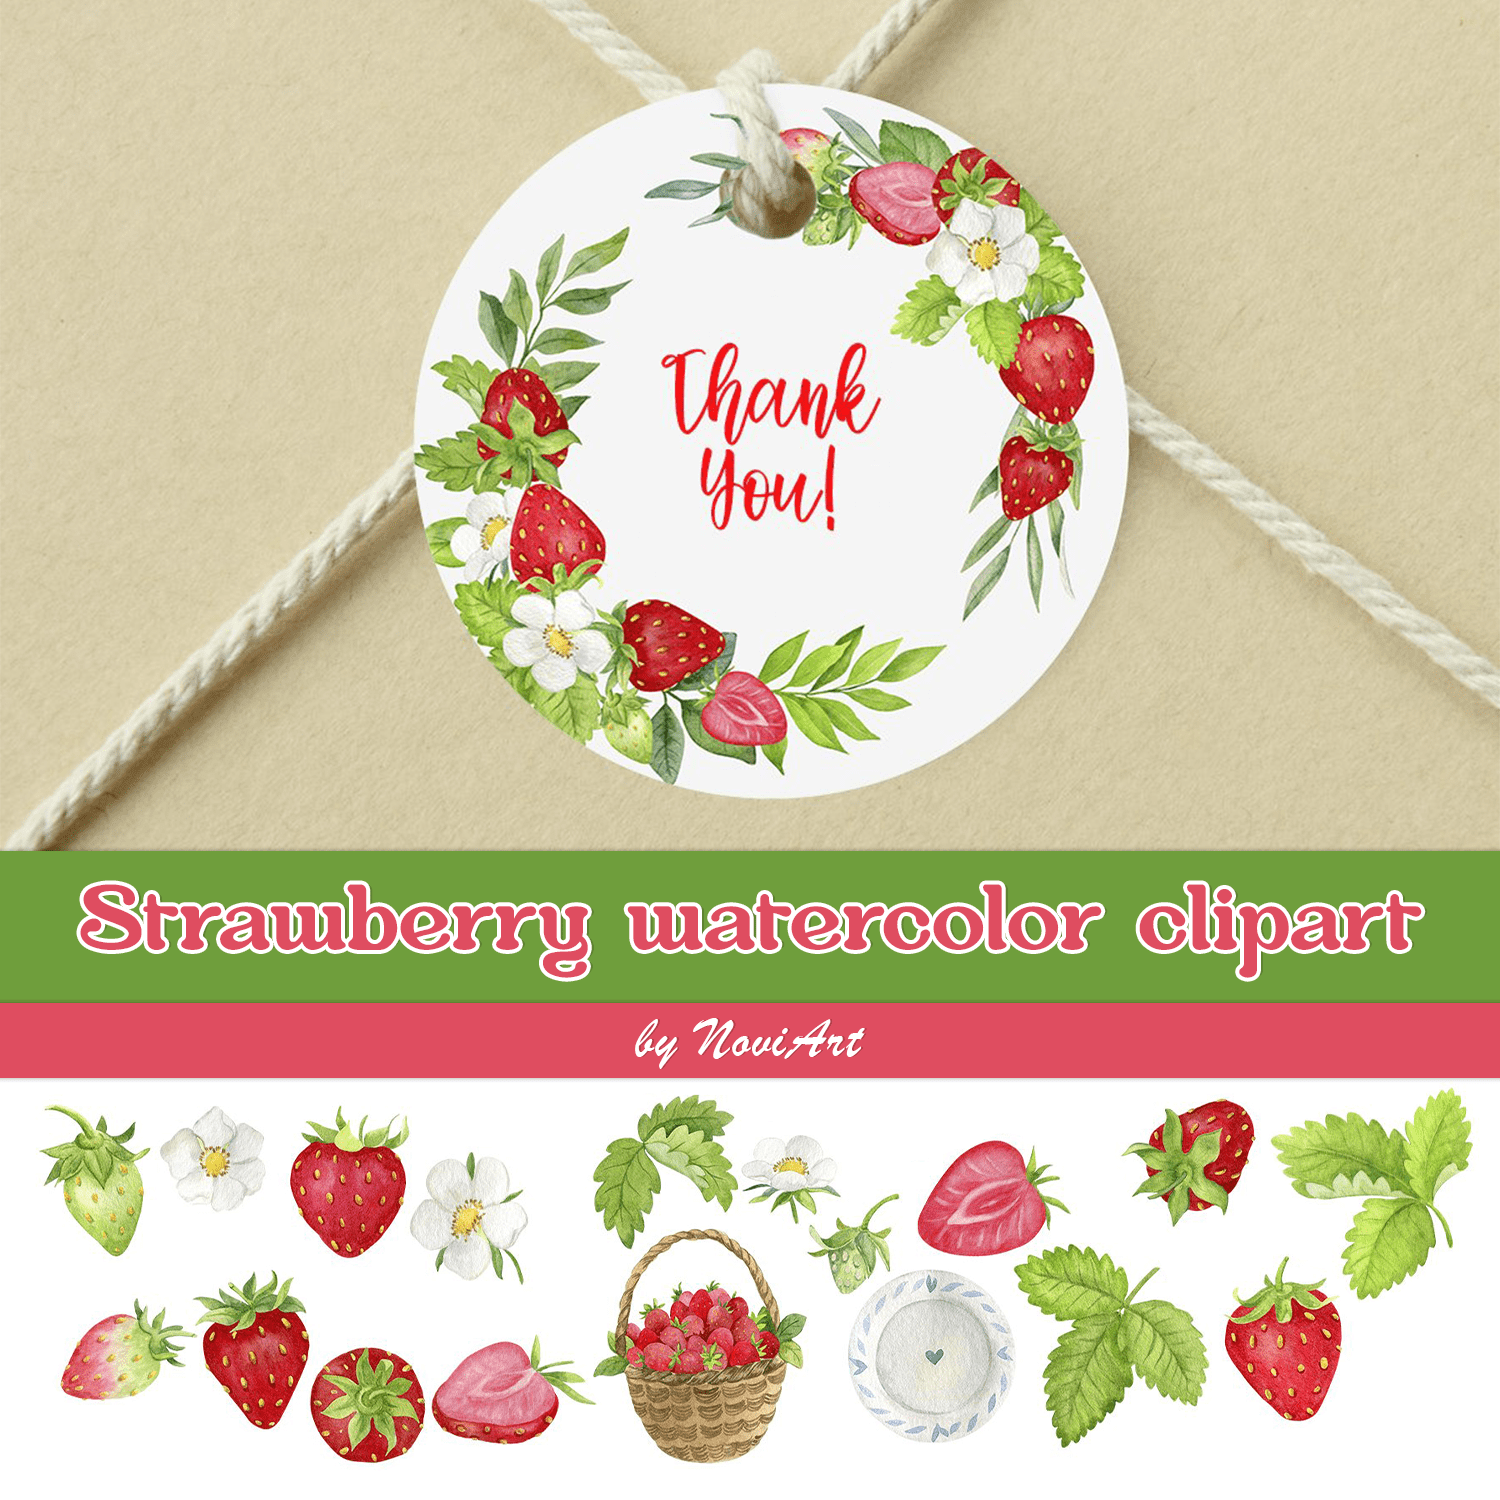 Strawberry Watercolor Clipart Cover.